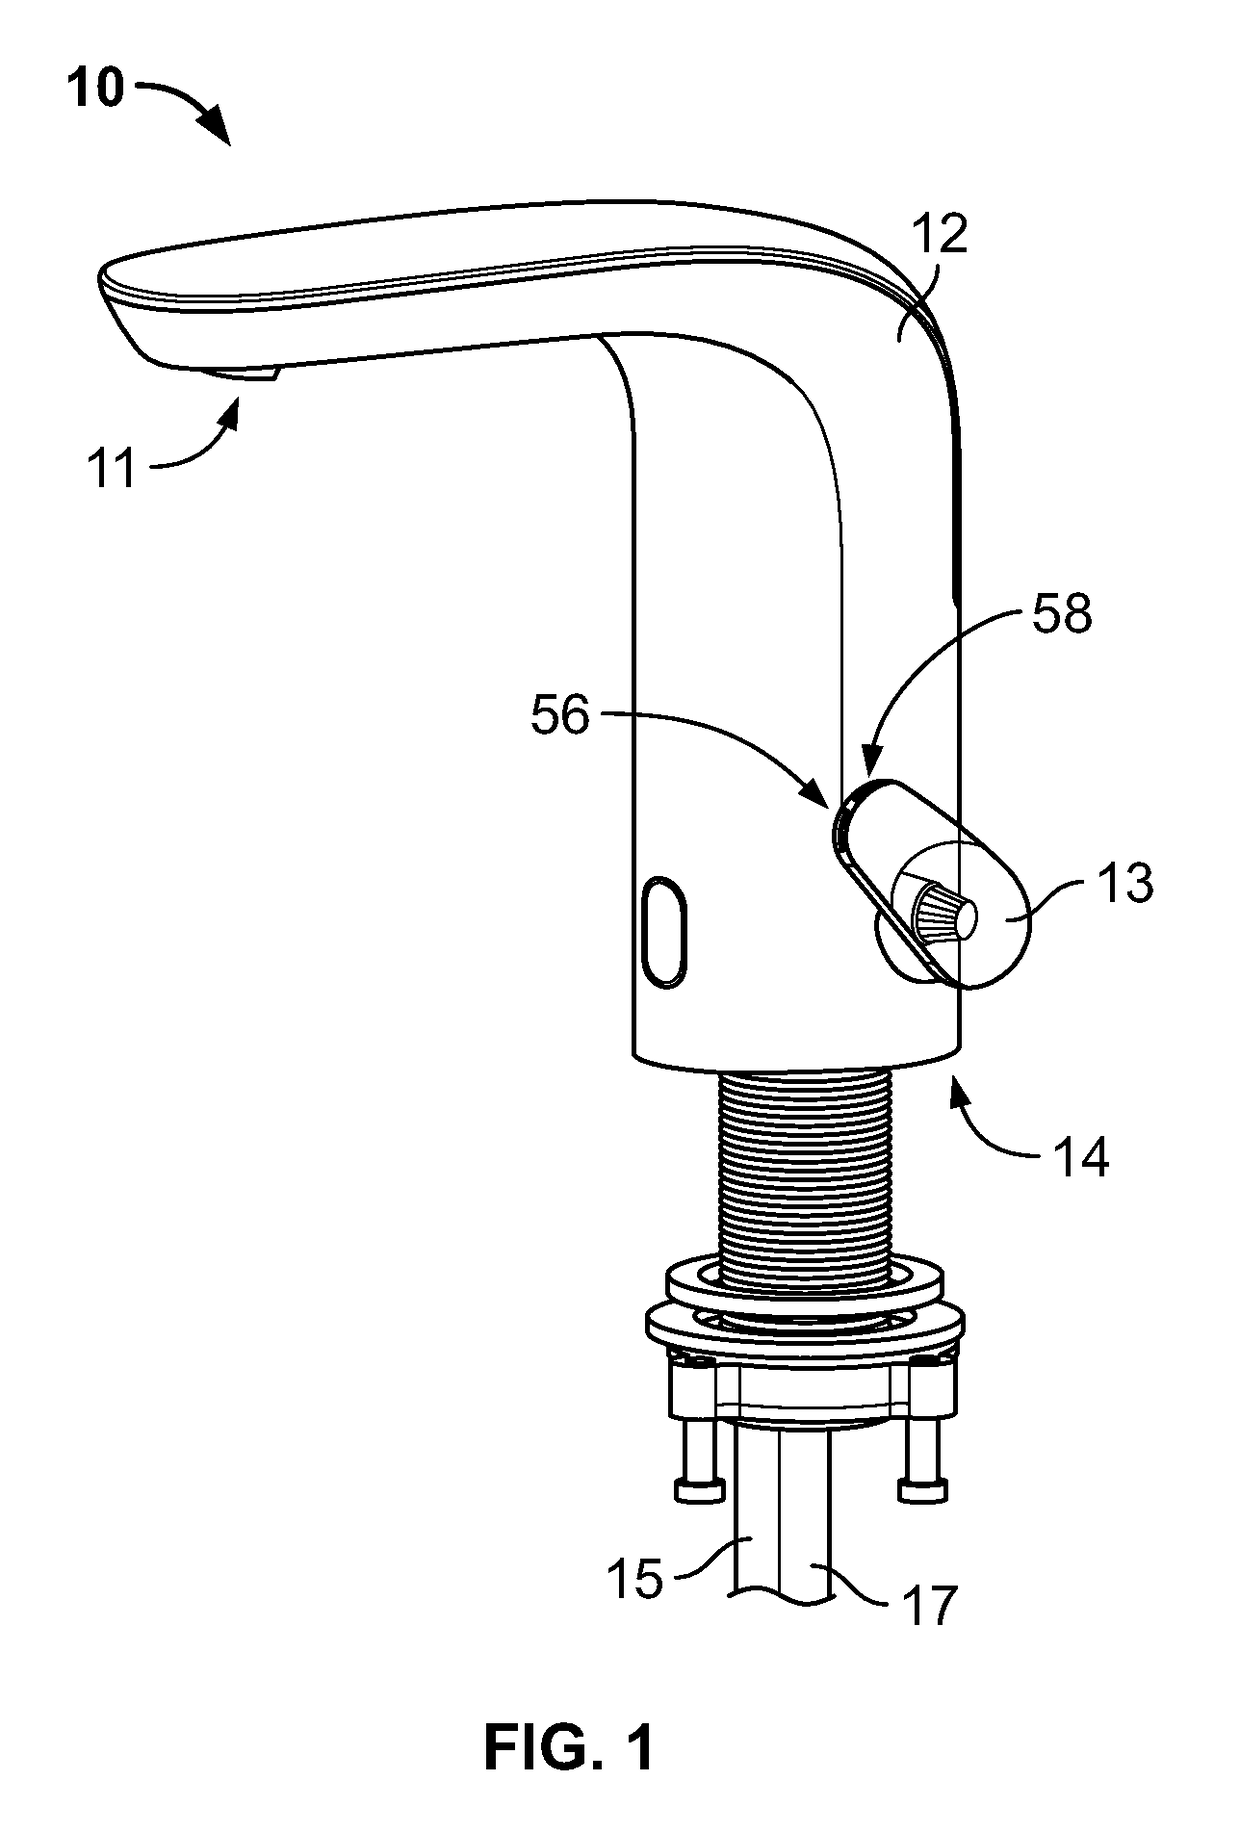 Faucet Assembly With Integrated Anti-Scald Device